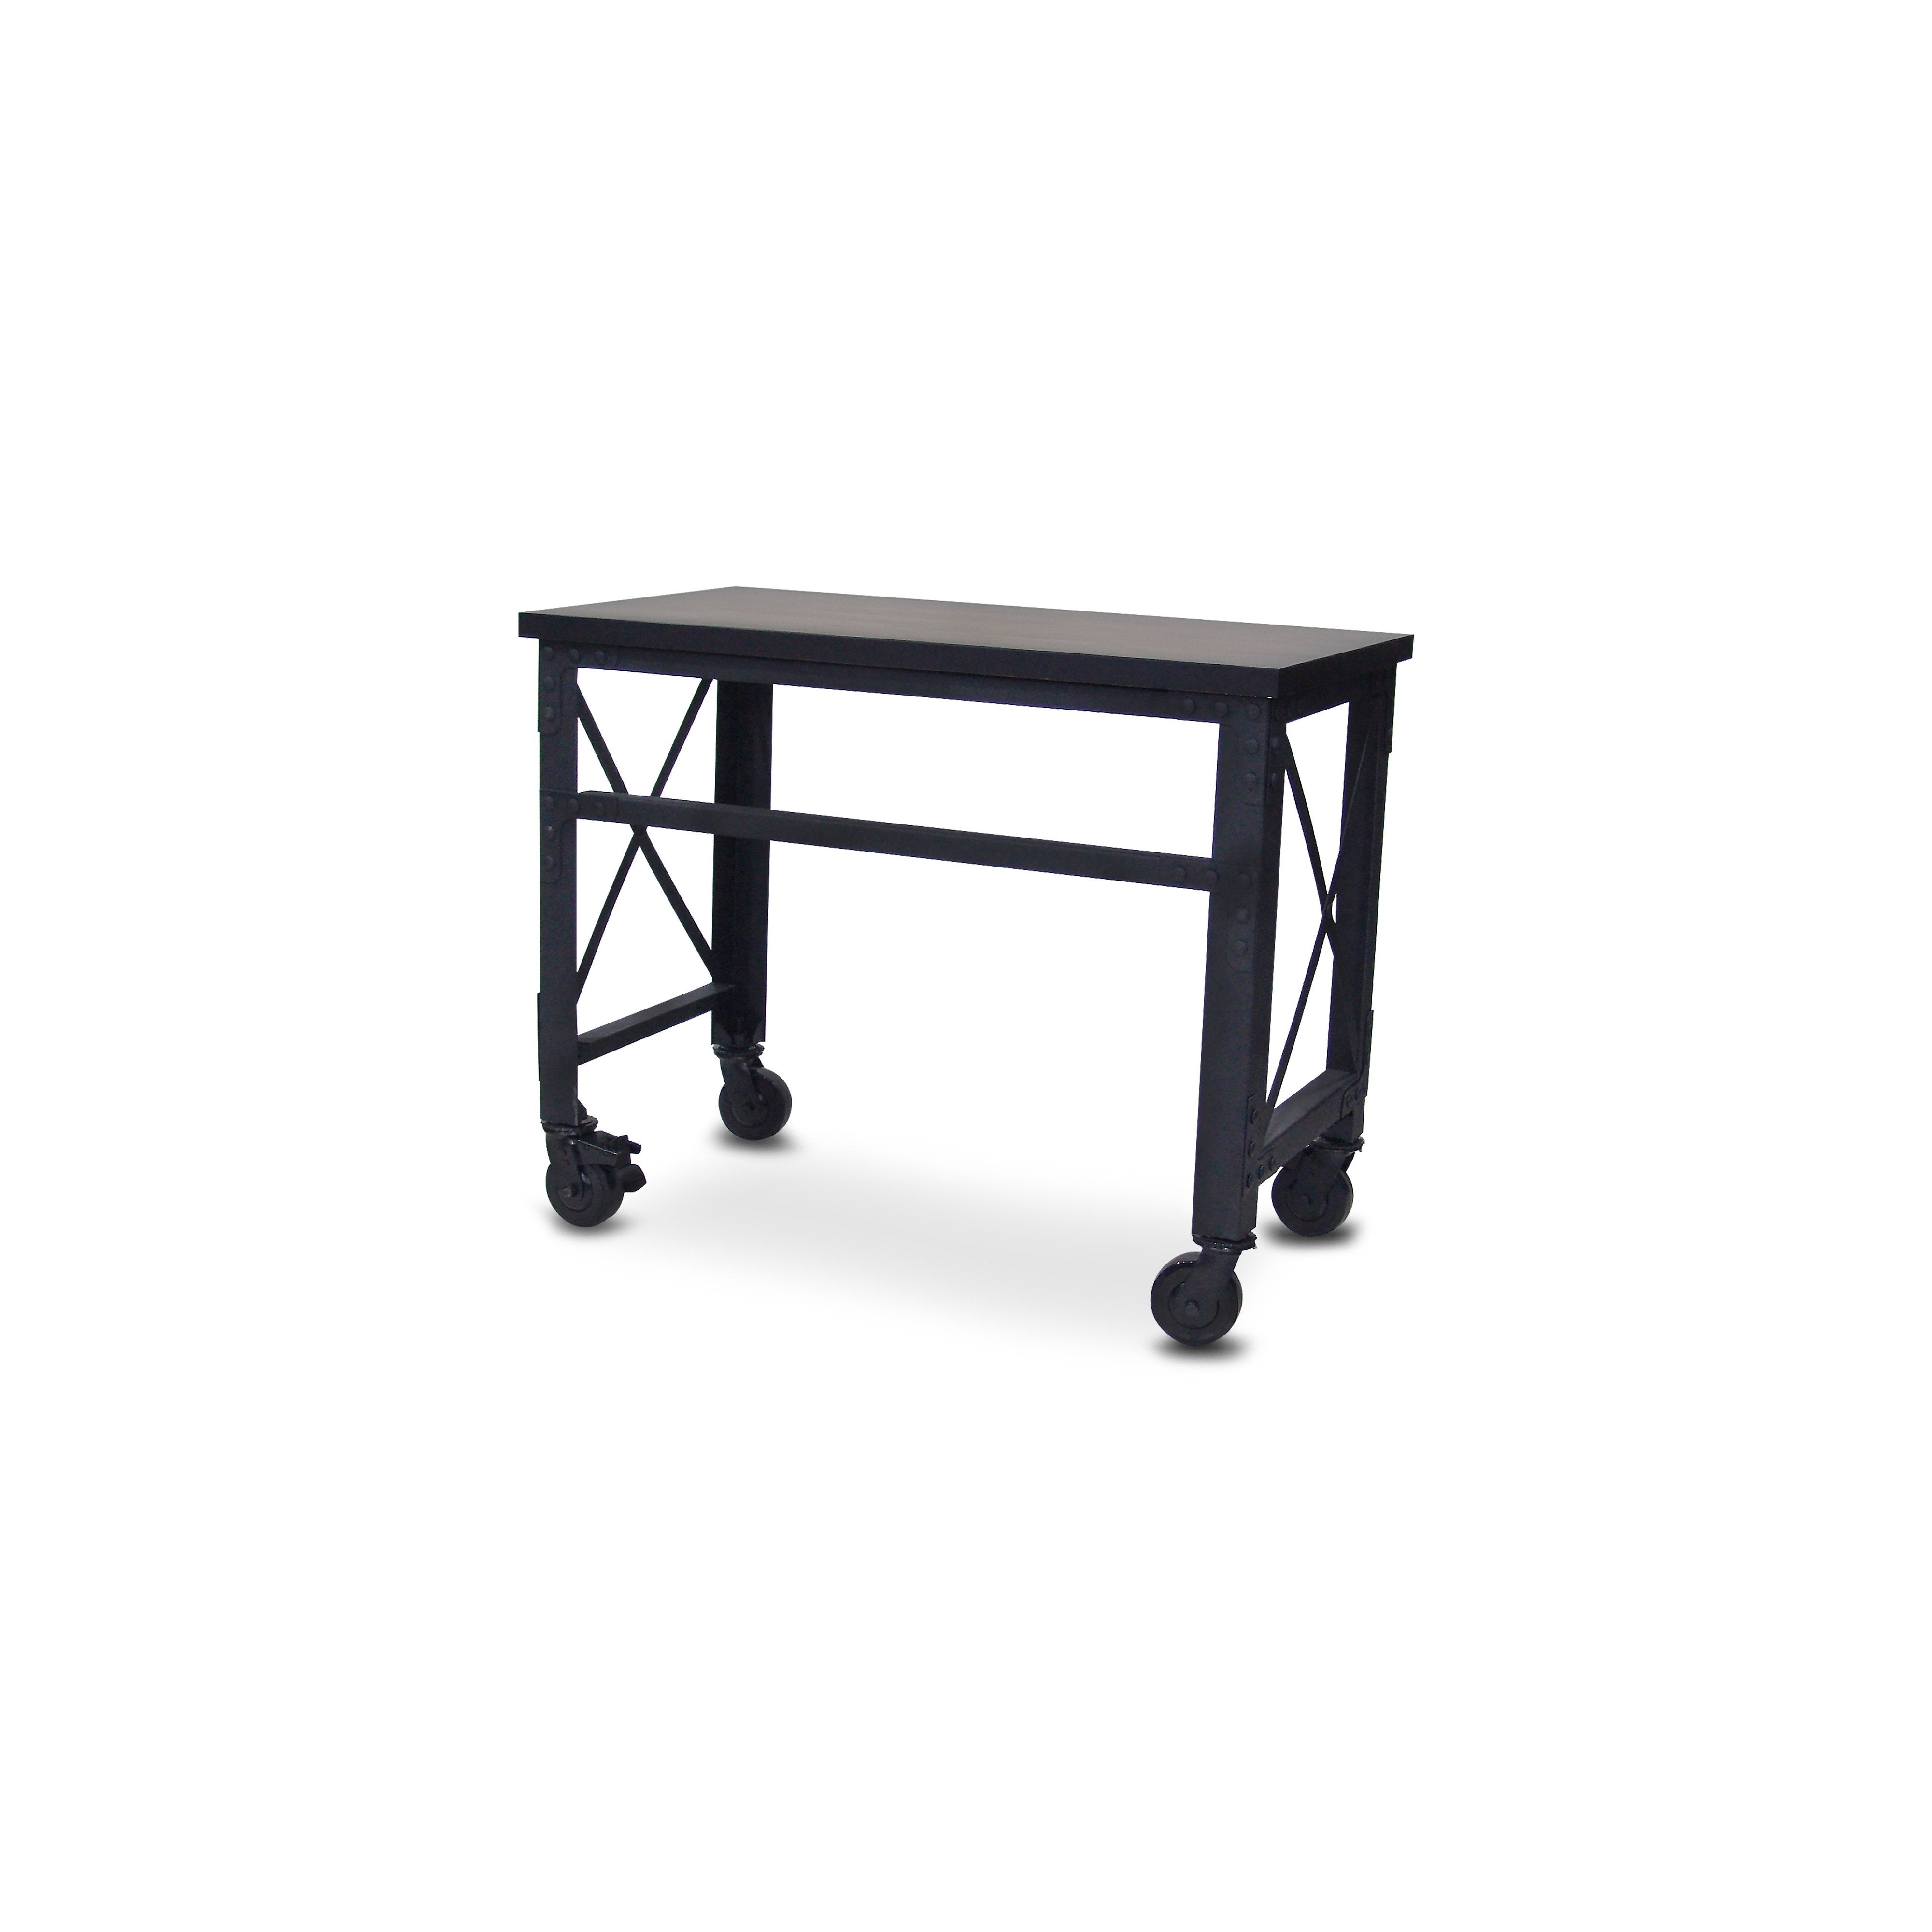 Durasheds furniture Duramax Rolling Industrial Desk with Wooden Top 46 Inches x 24 Inches